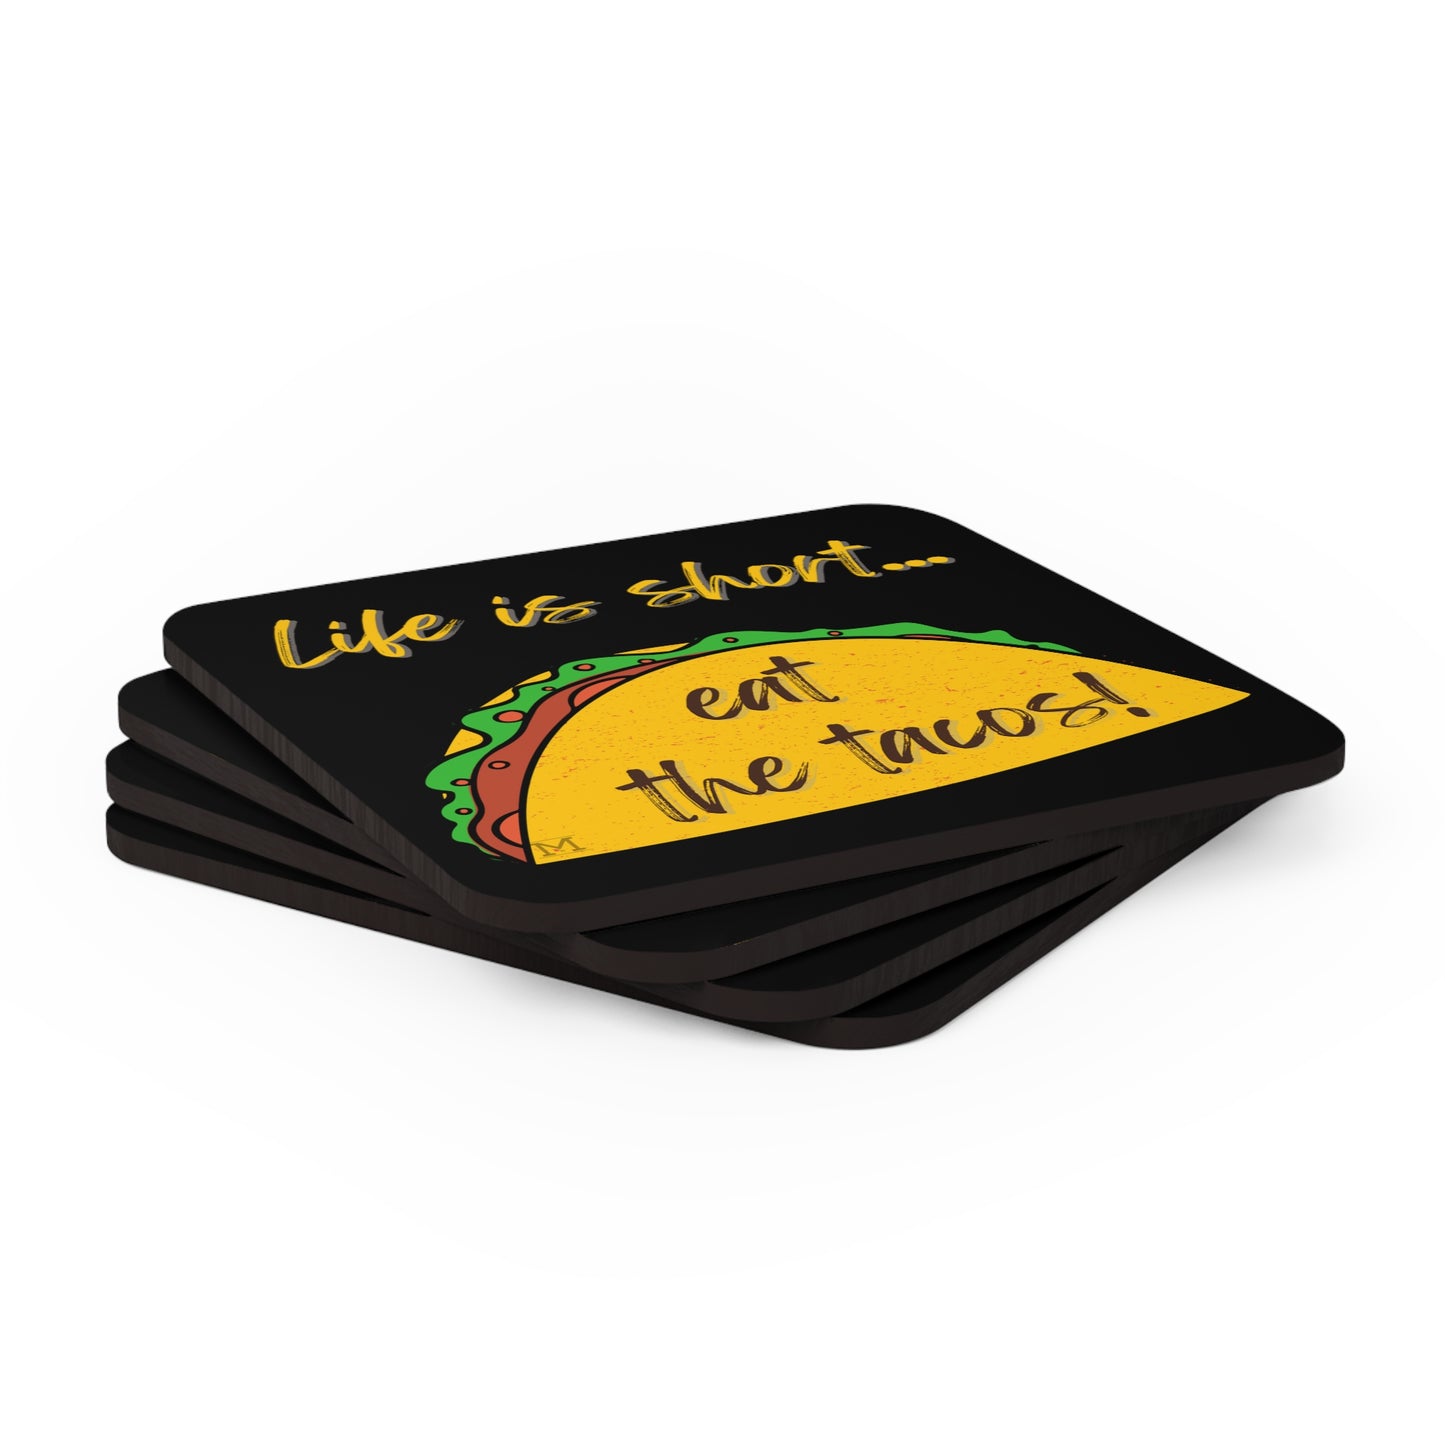 Funny Sayings Life Is Short... Eat The Tacos! Corkwood Coaster Set of 4 by MII Designs